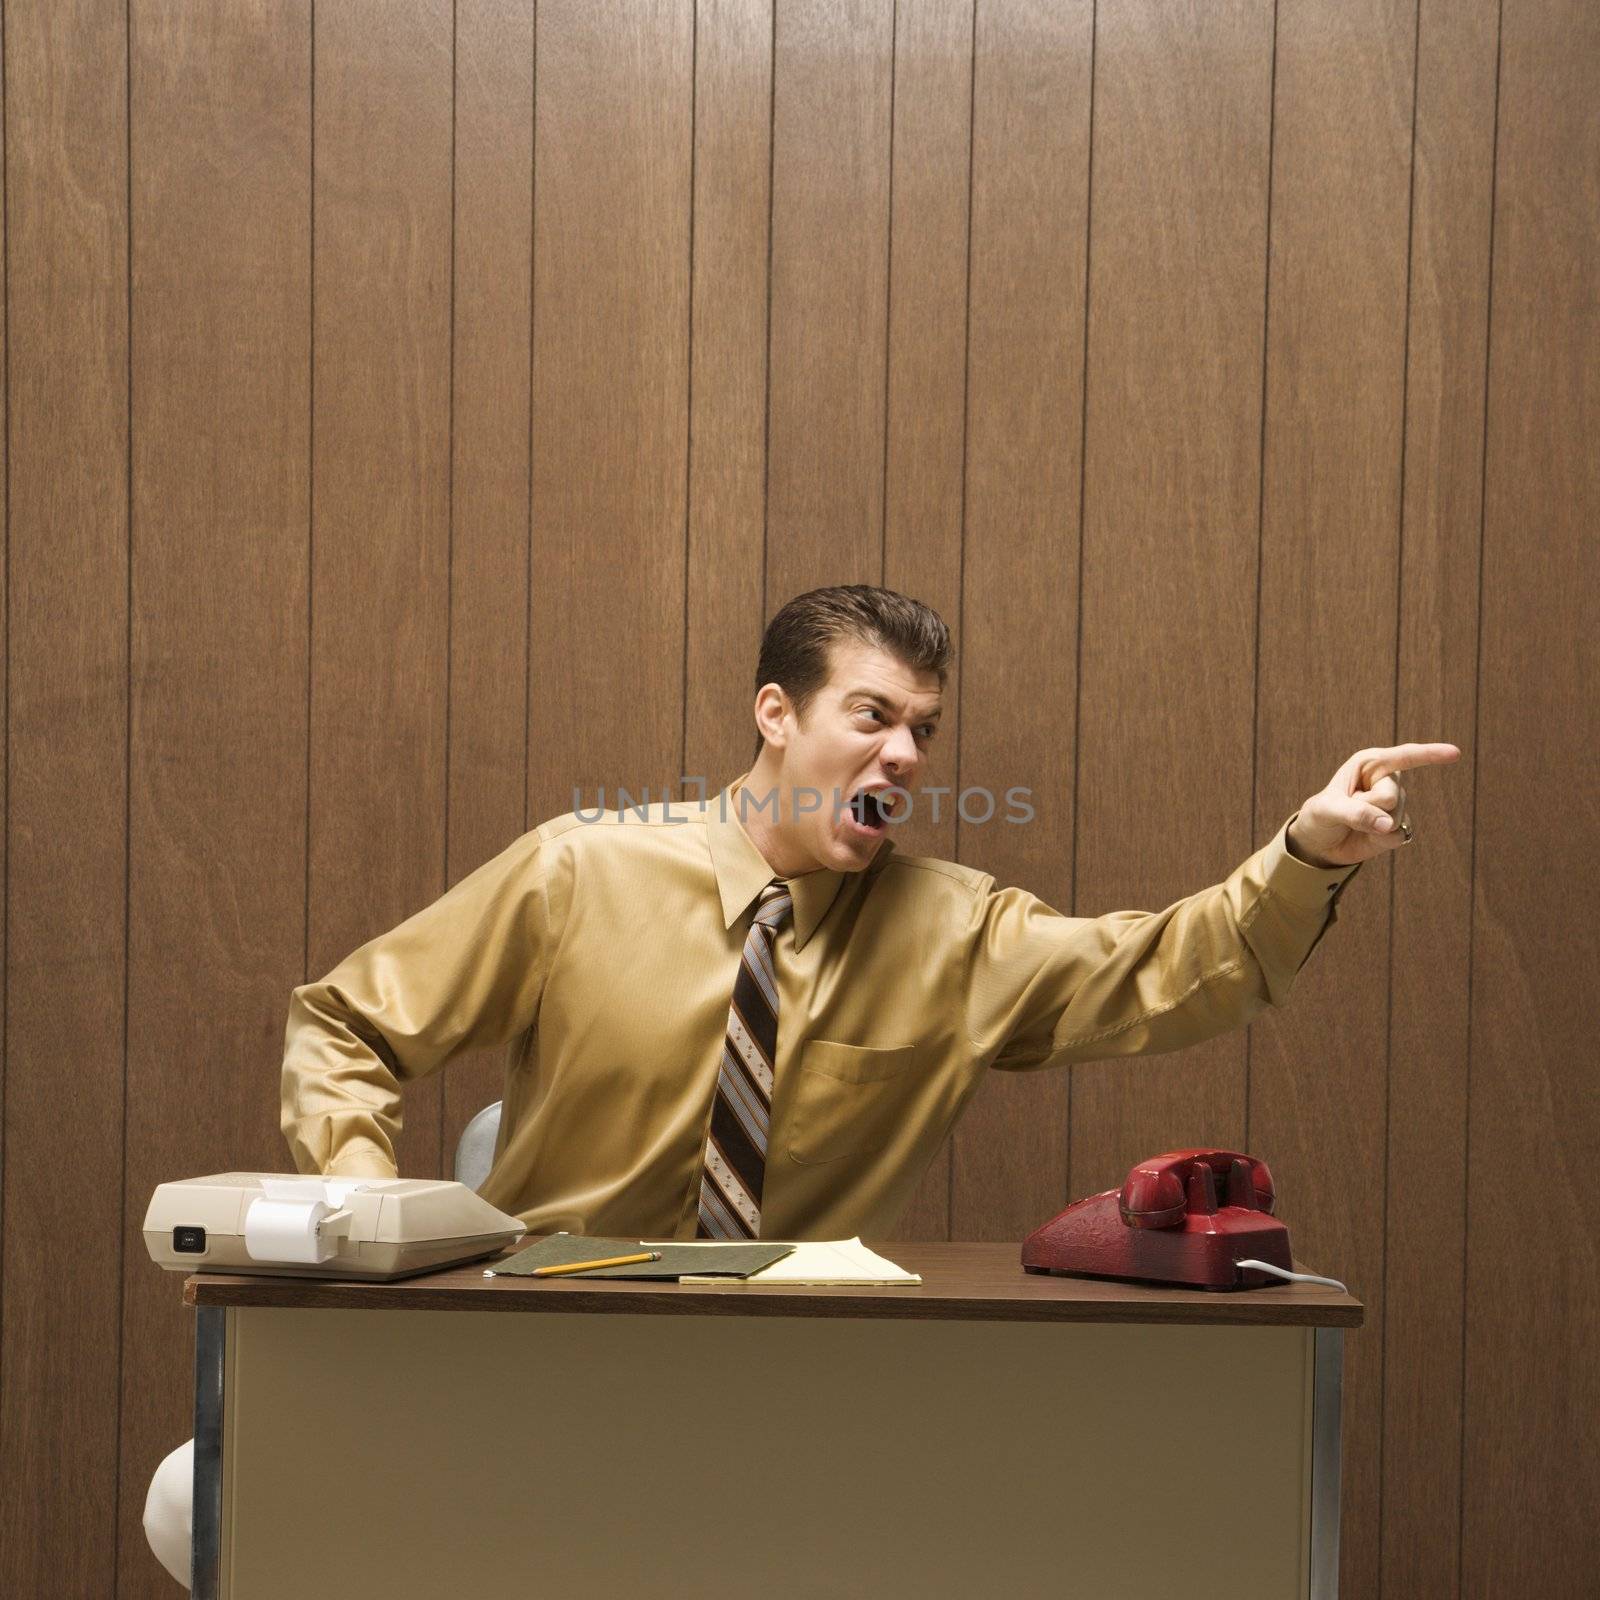 Caucasion mid-adult retro businessman sitting at desk pointing in anger.